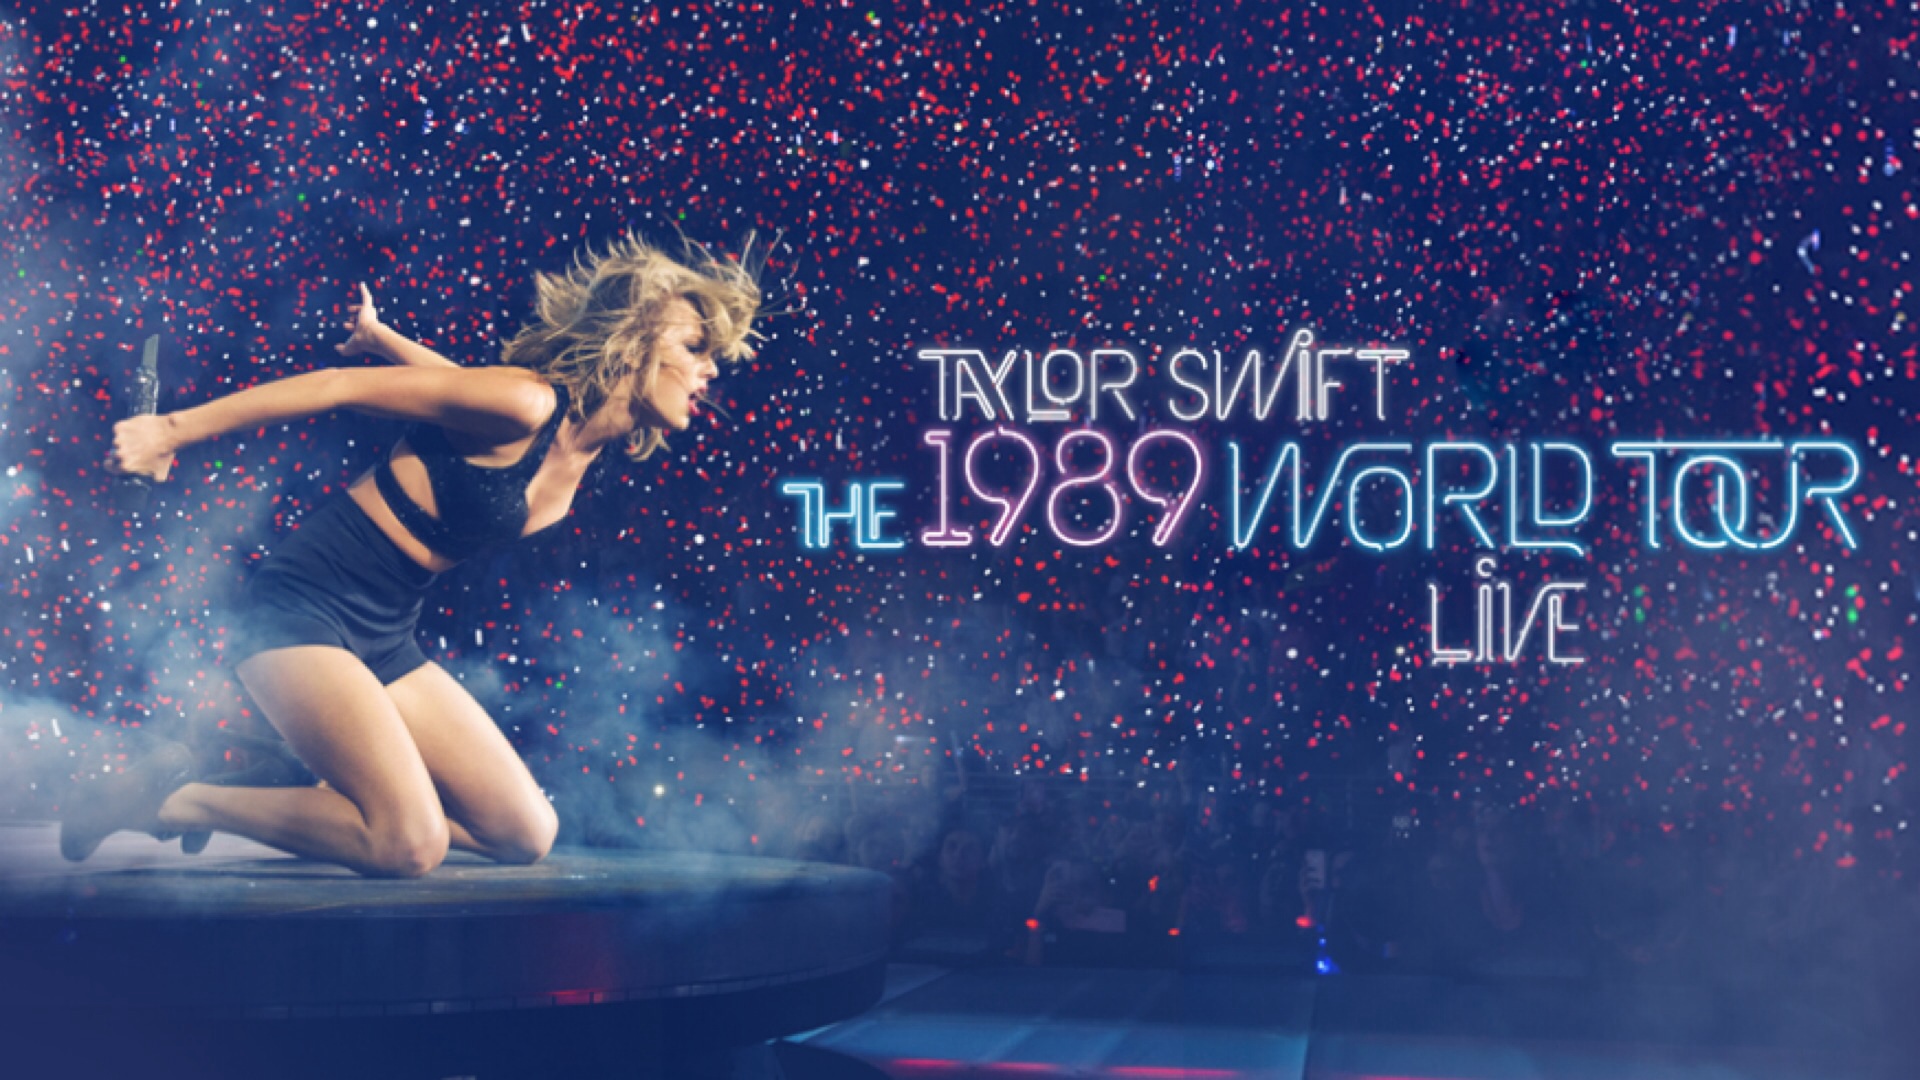 Taylor Swift World Tour Video to Appear Only